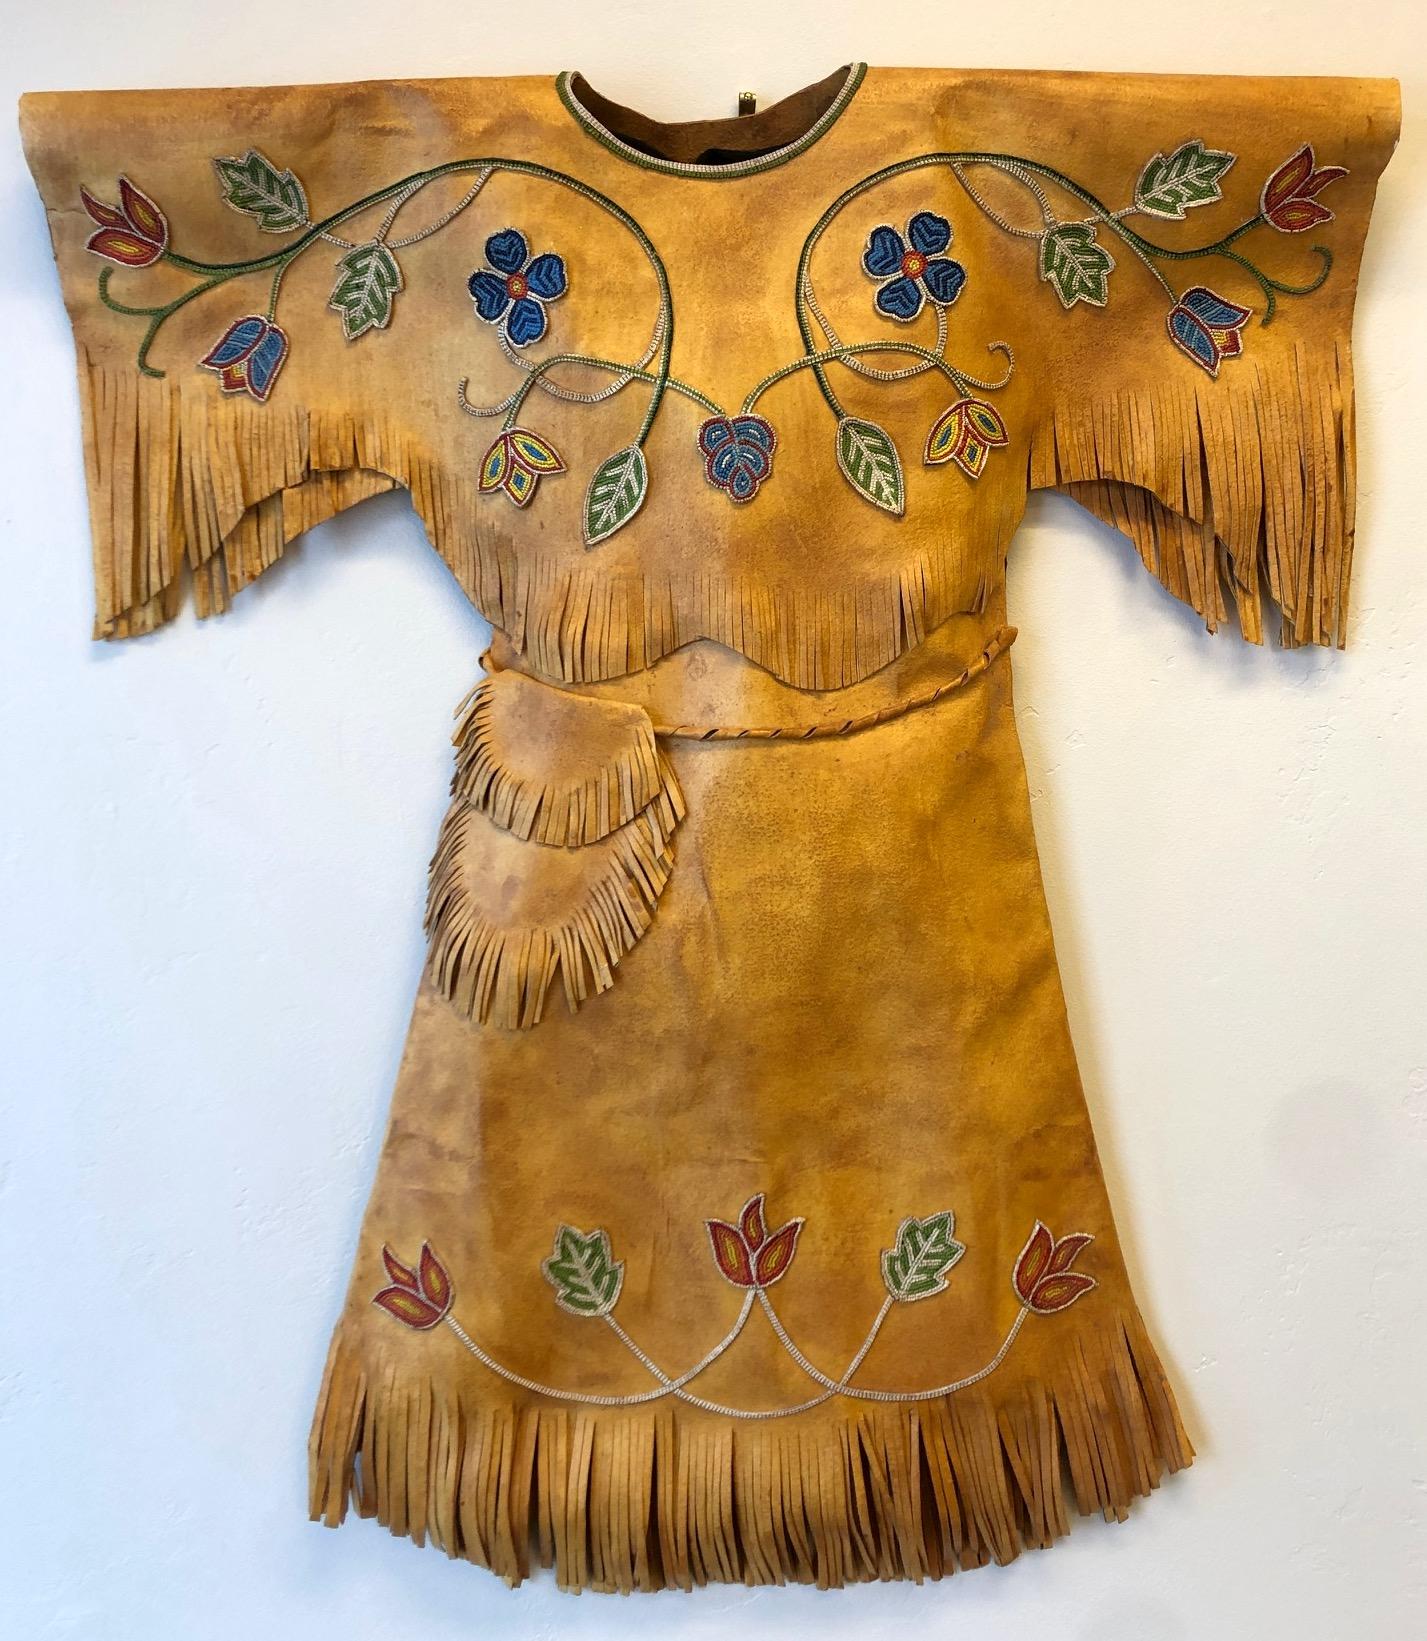 Replica Ceremonial Dress - Mixed Media Art by Janet Nelson